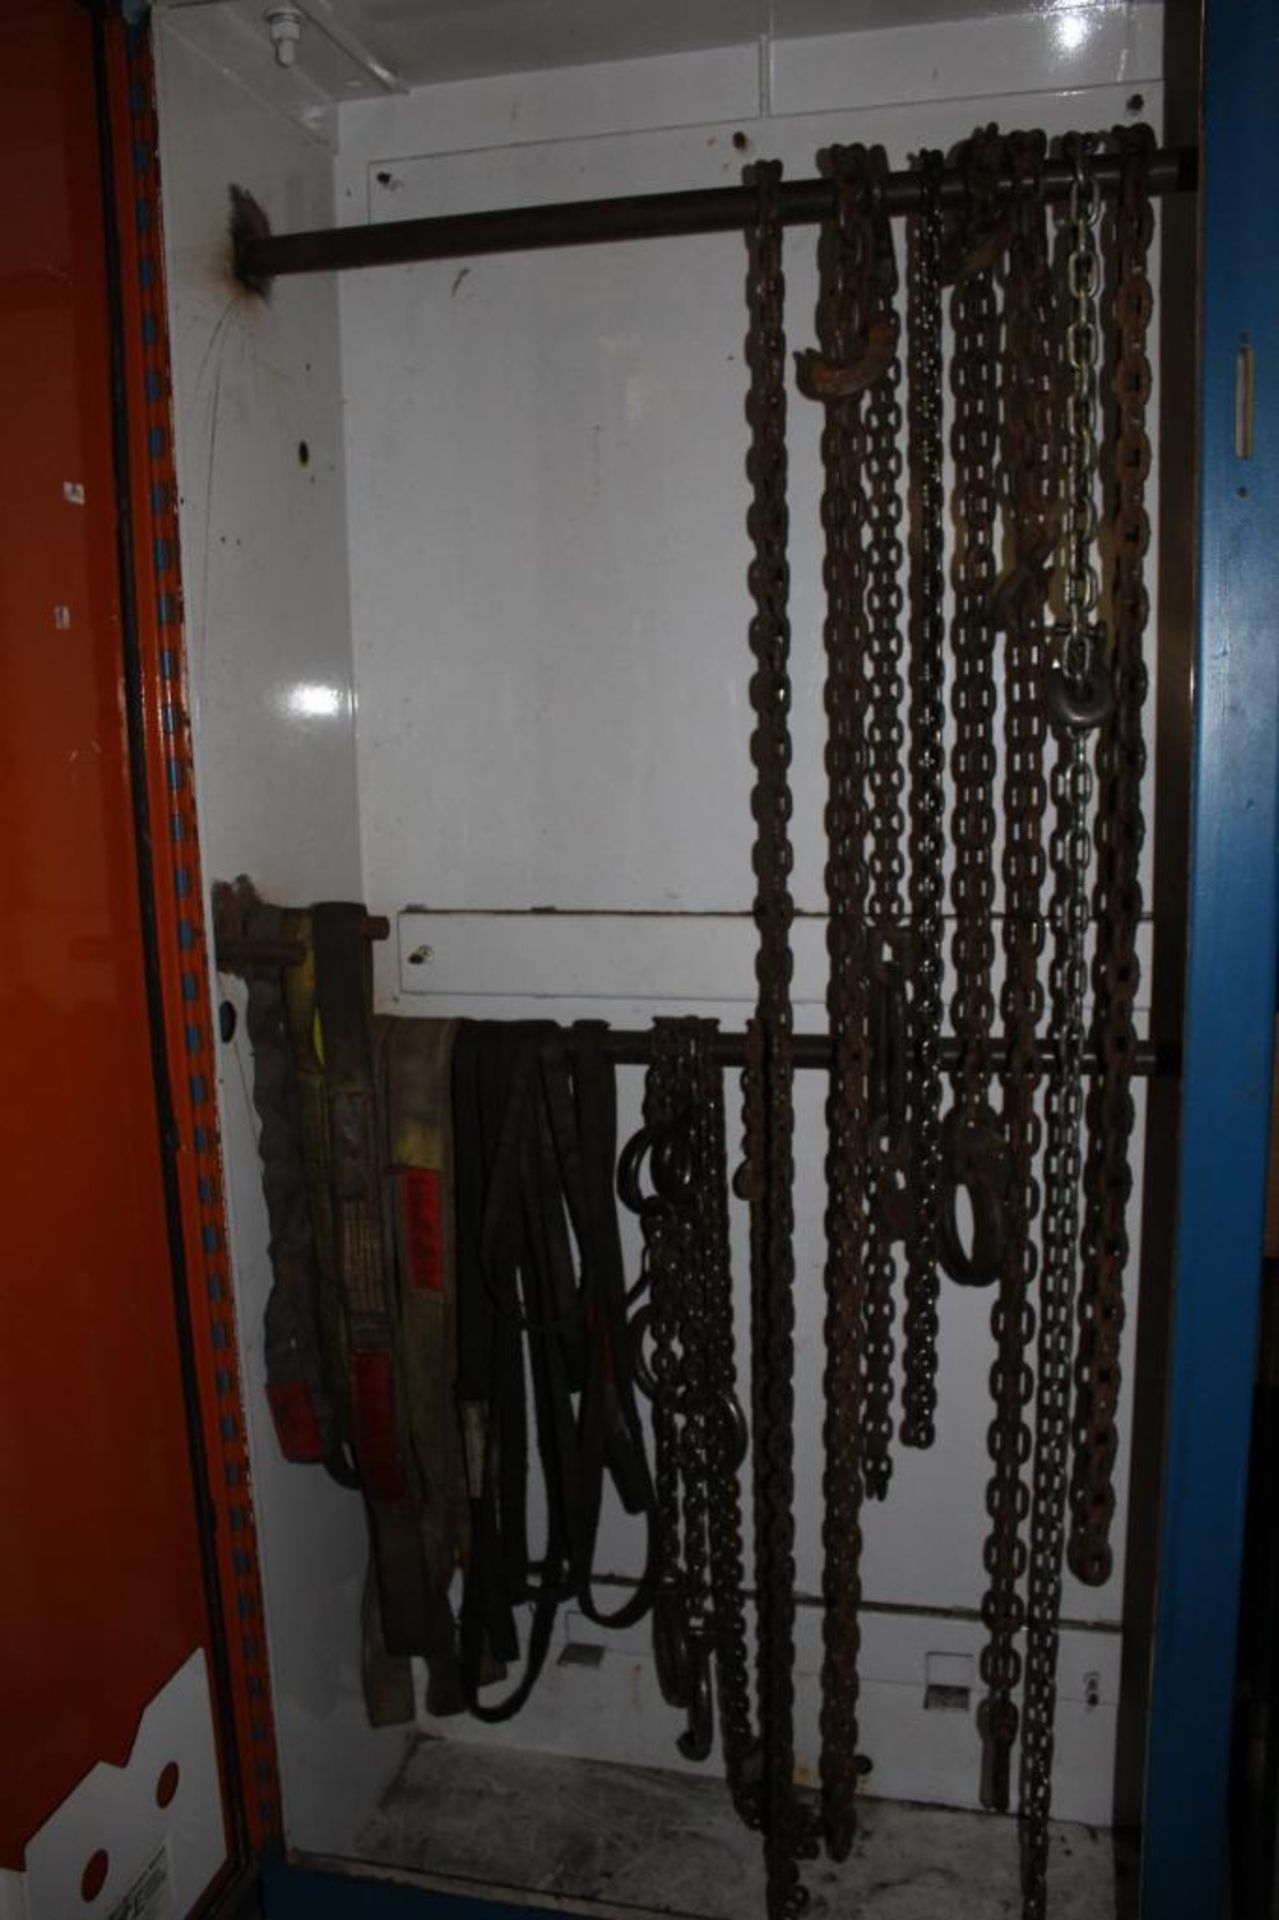 Cabinet includes contents of chains and slings - Image 2 of 2